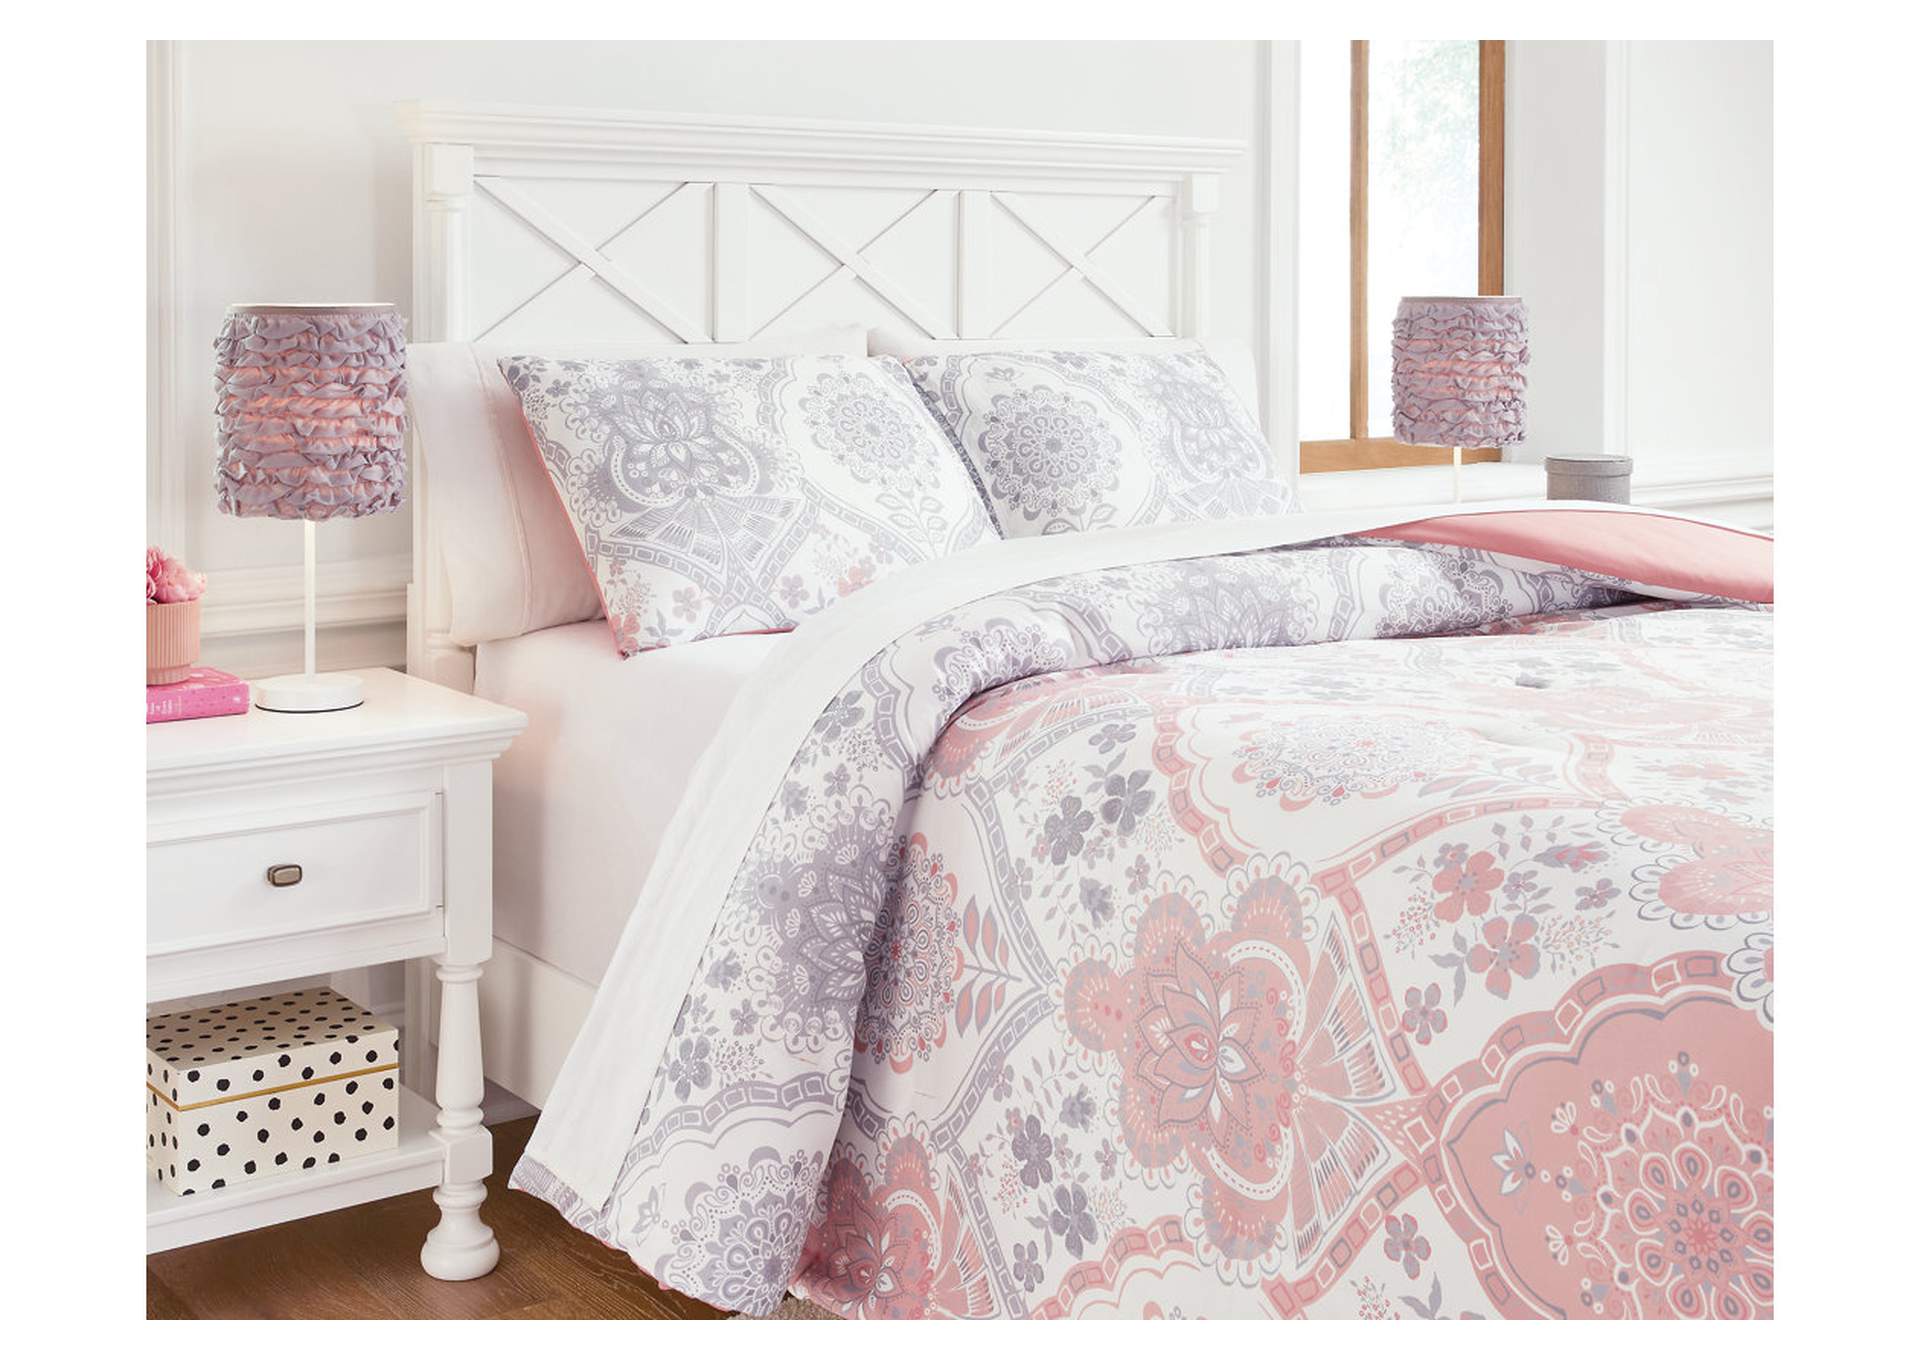 Avaleigh Full Comforter Set,Signature Design By Ashley